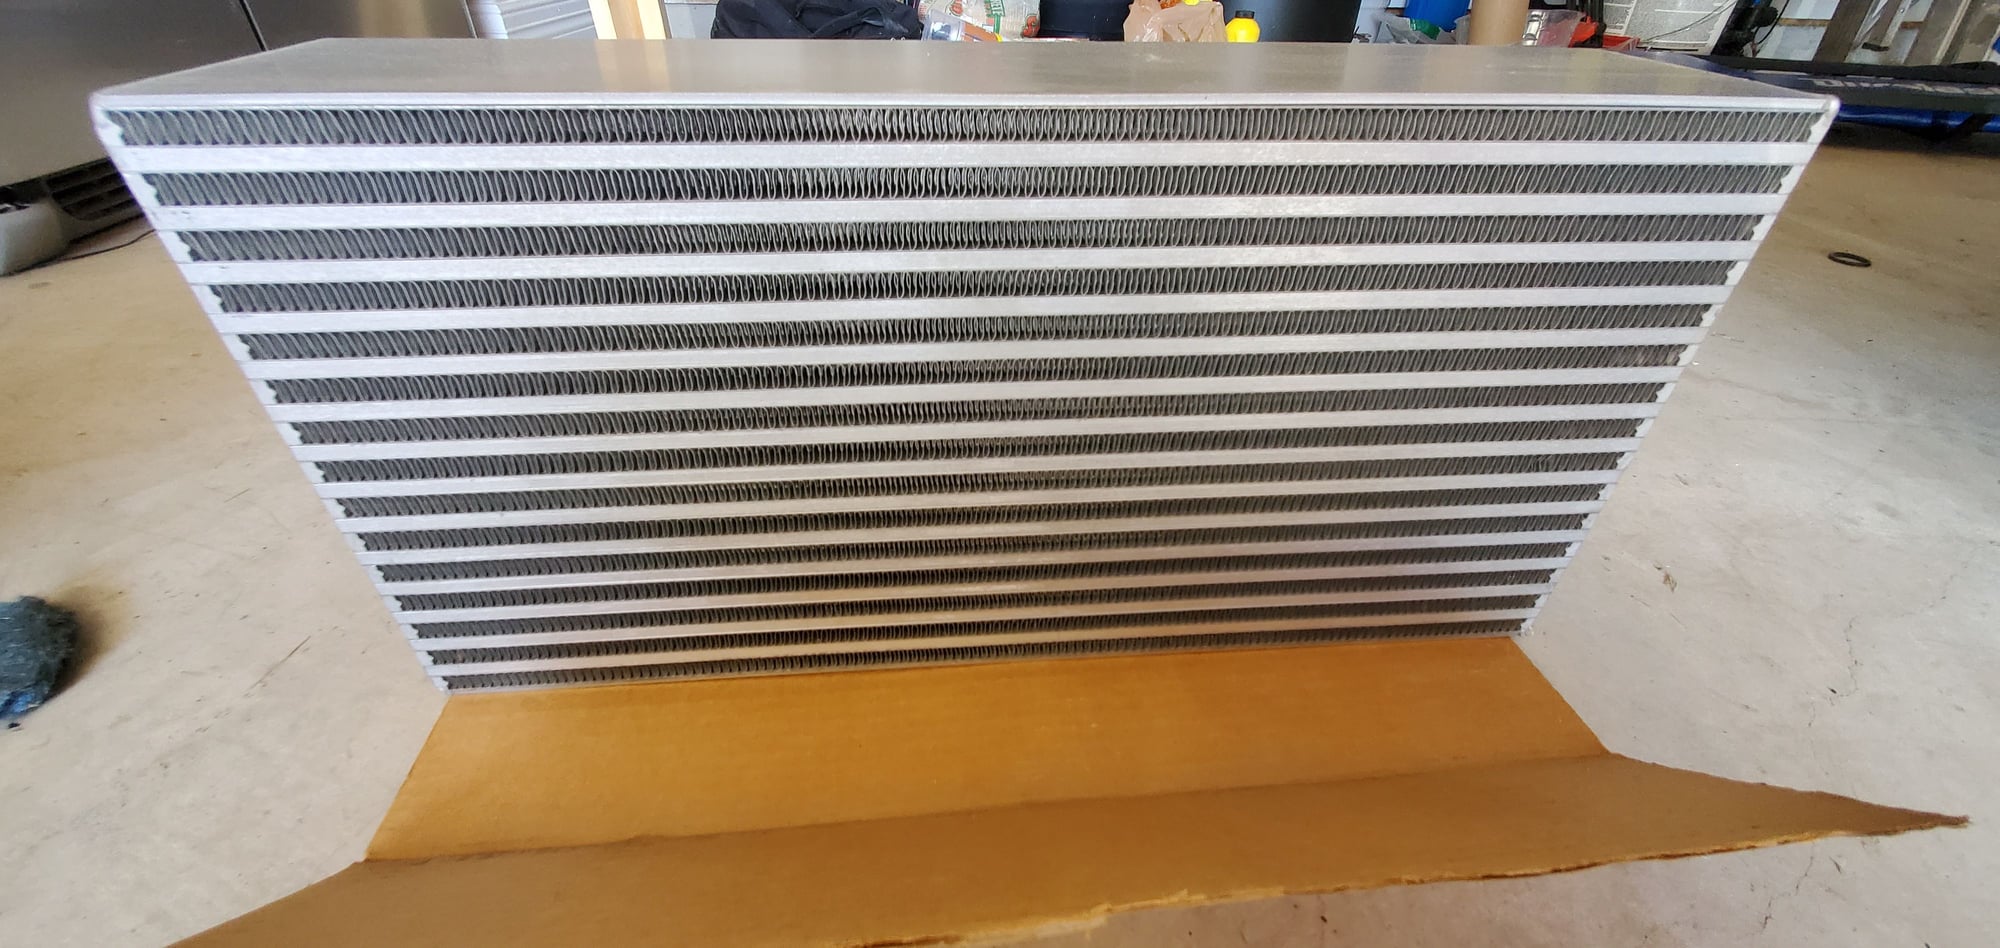 Engine - Power Adders - NEW spearco intercooler core - New - 0  All Models - Austin, TX 78738, United States